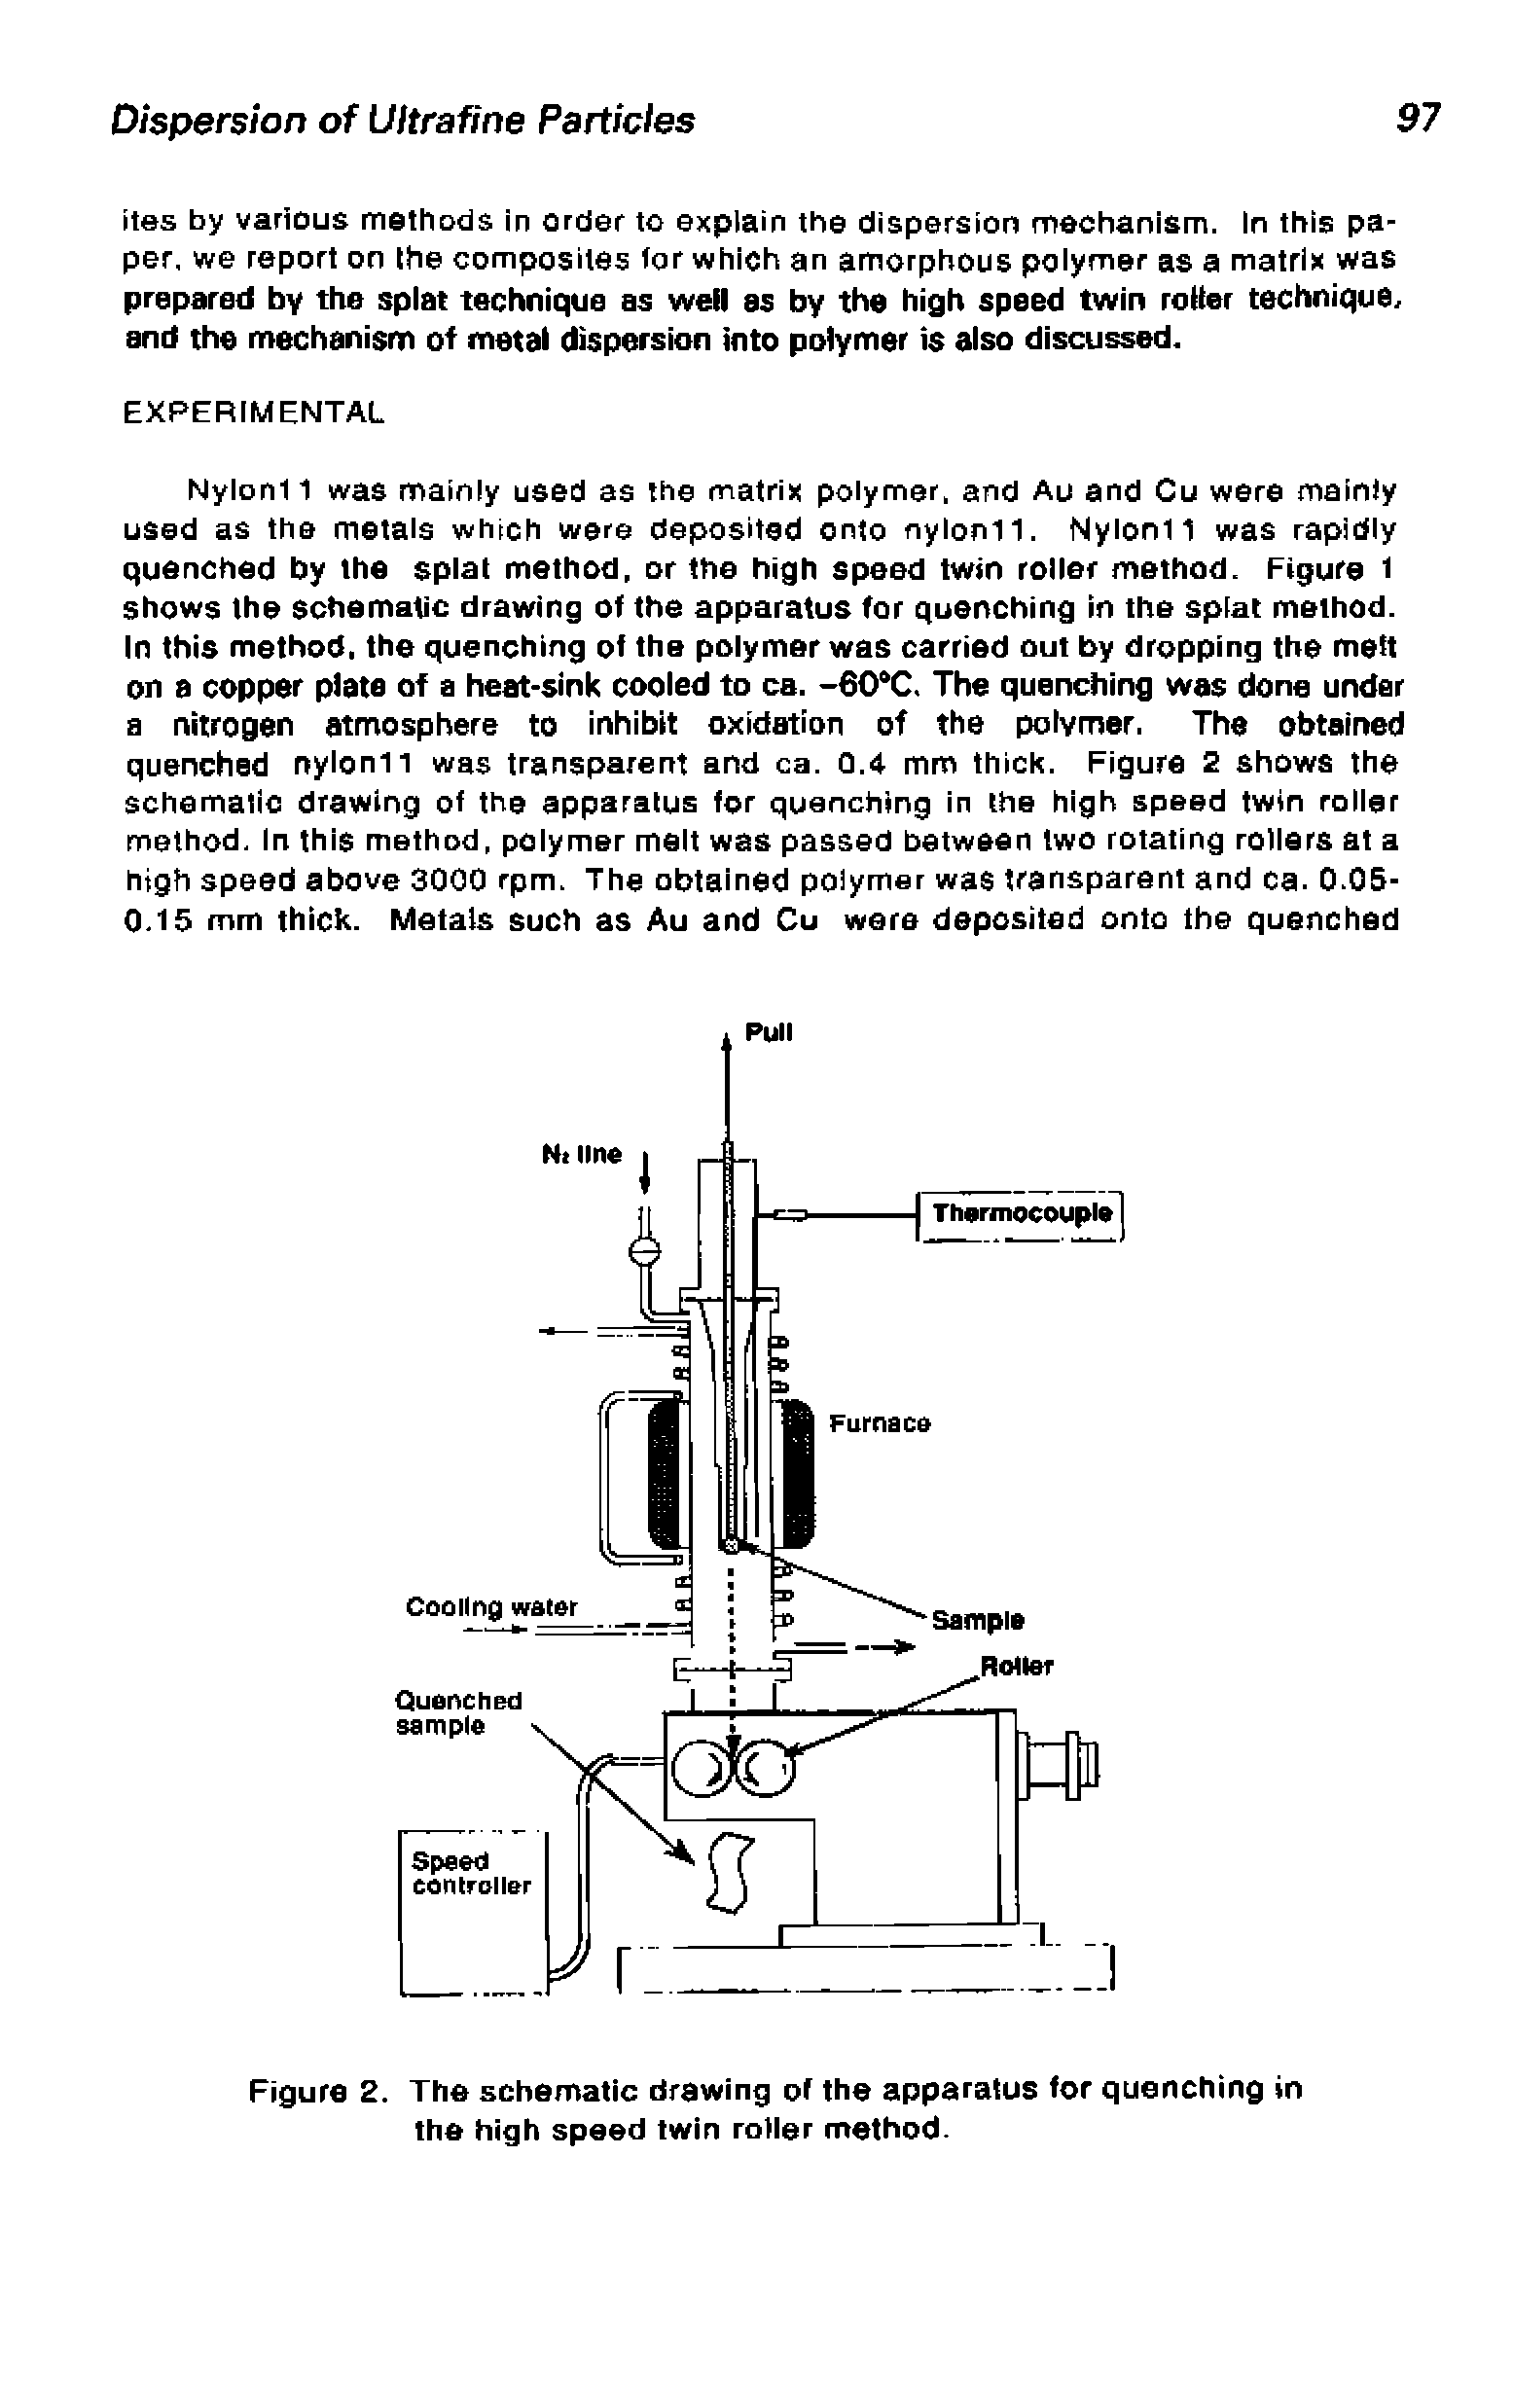 Figure 2. The schematic drawing of the apparatus for quenching in the high speed twin roller method.